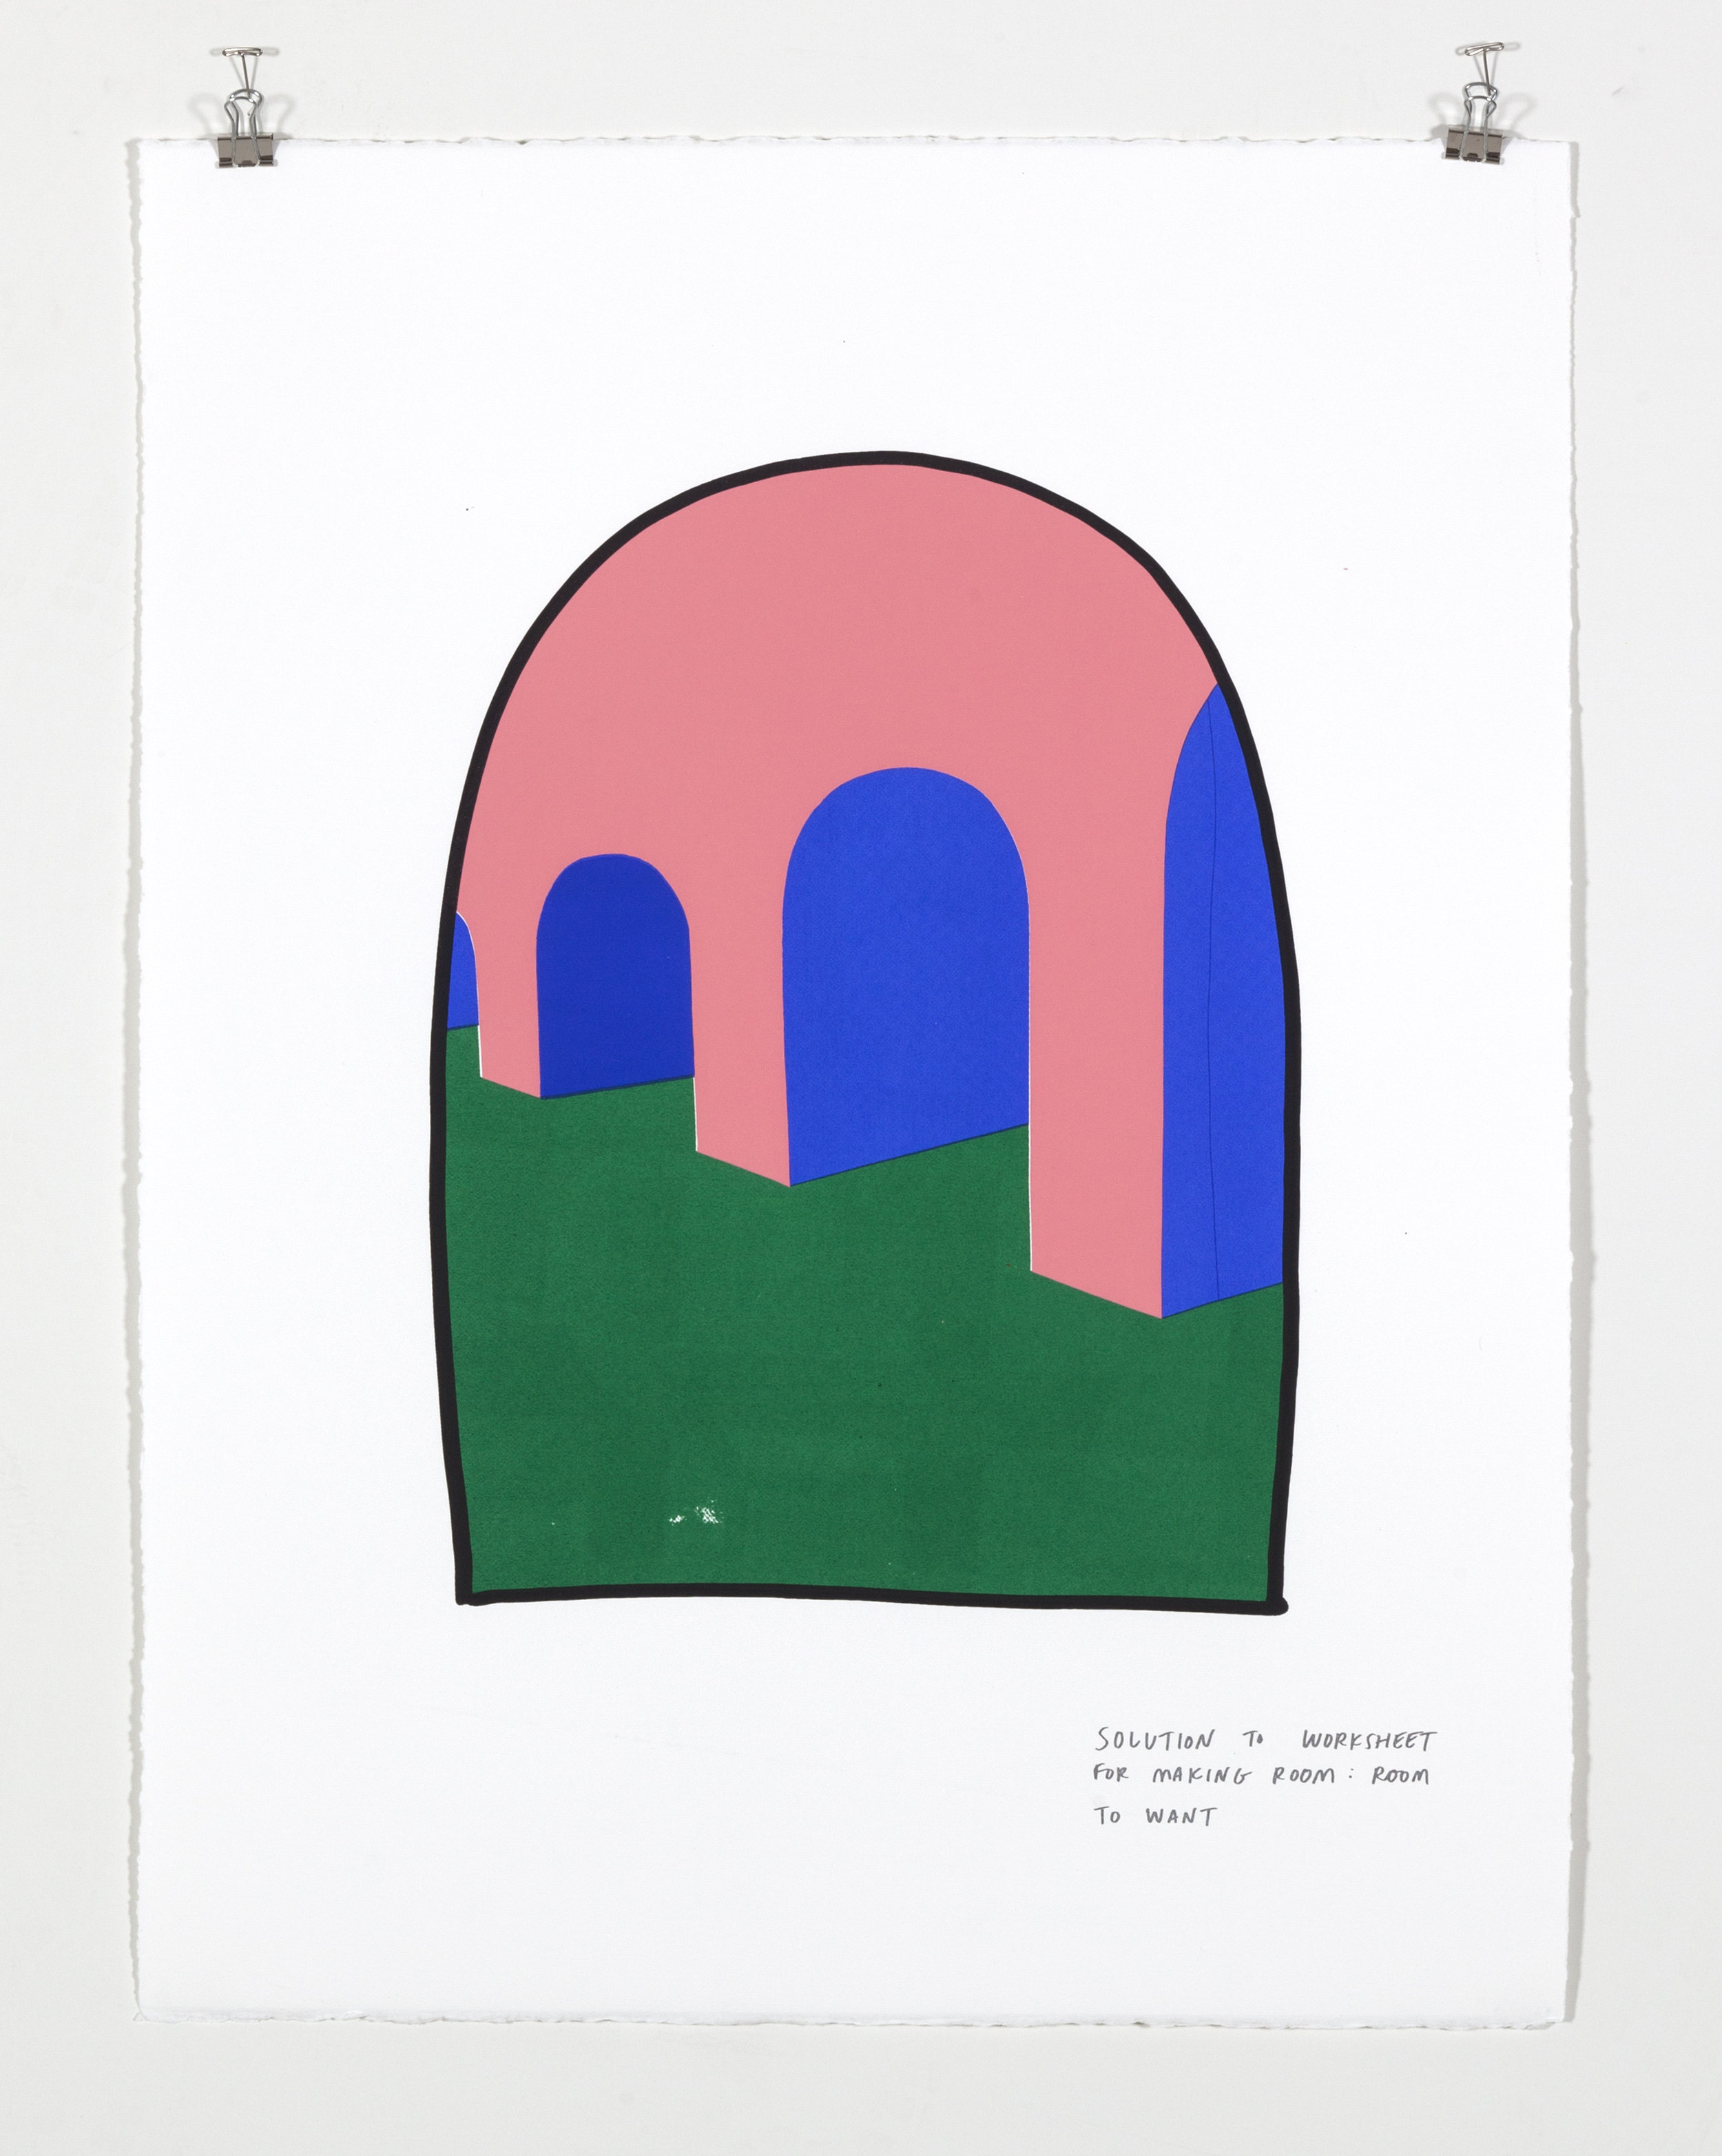    Solution to Worksheet for Making Room: Room to Want,  2018  Five color silkscreen print on paper 19 7/8 x 25 7/8 inches 